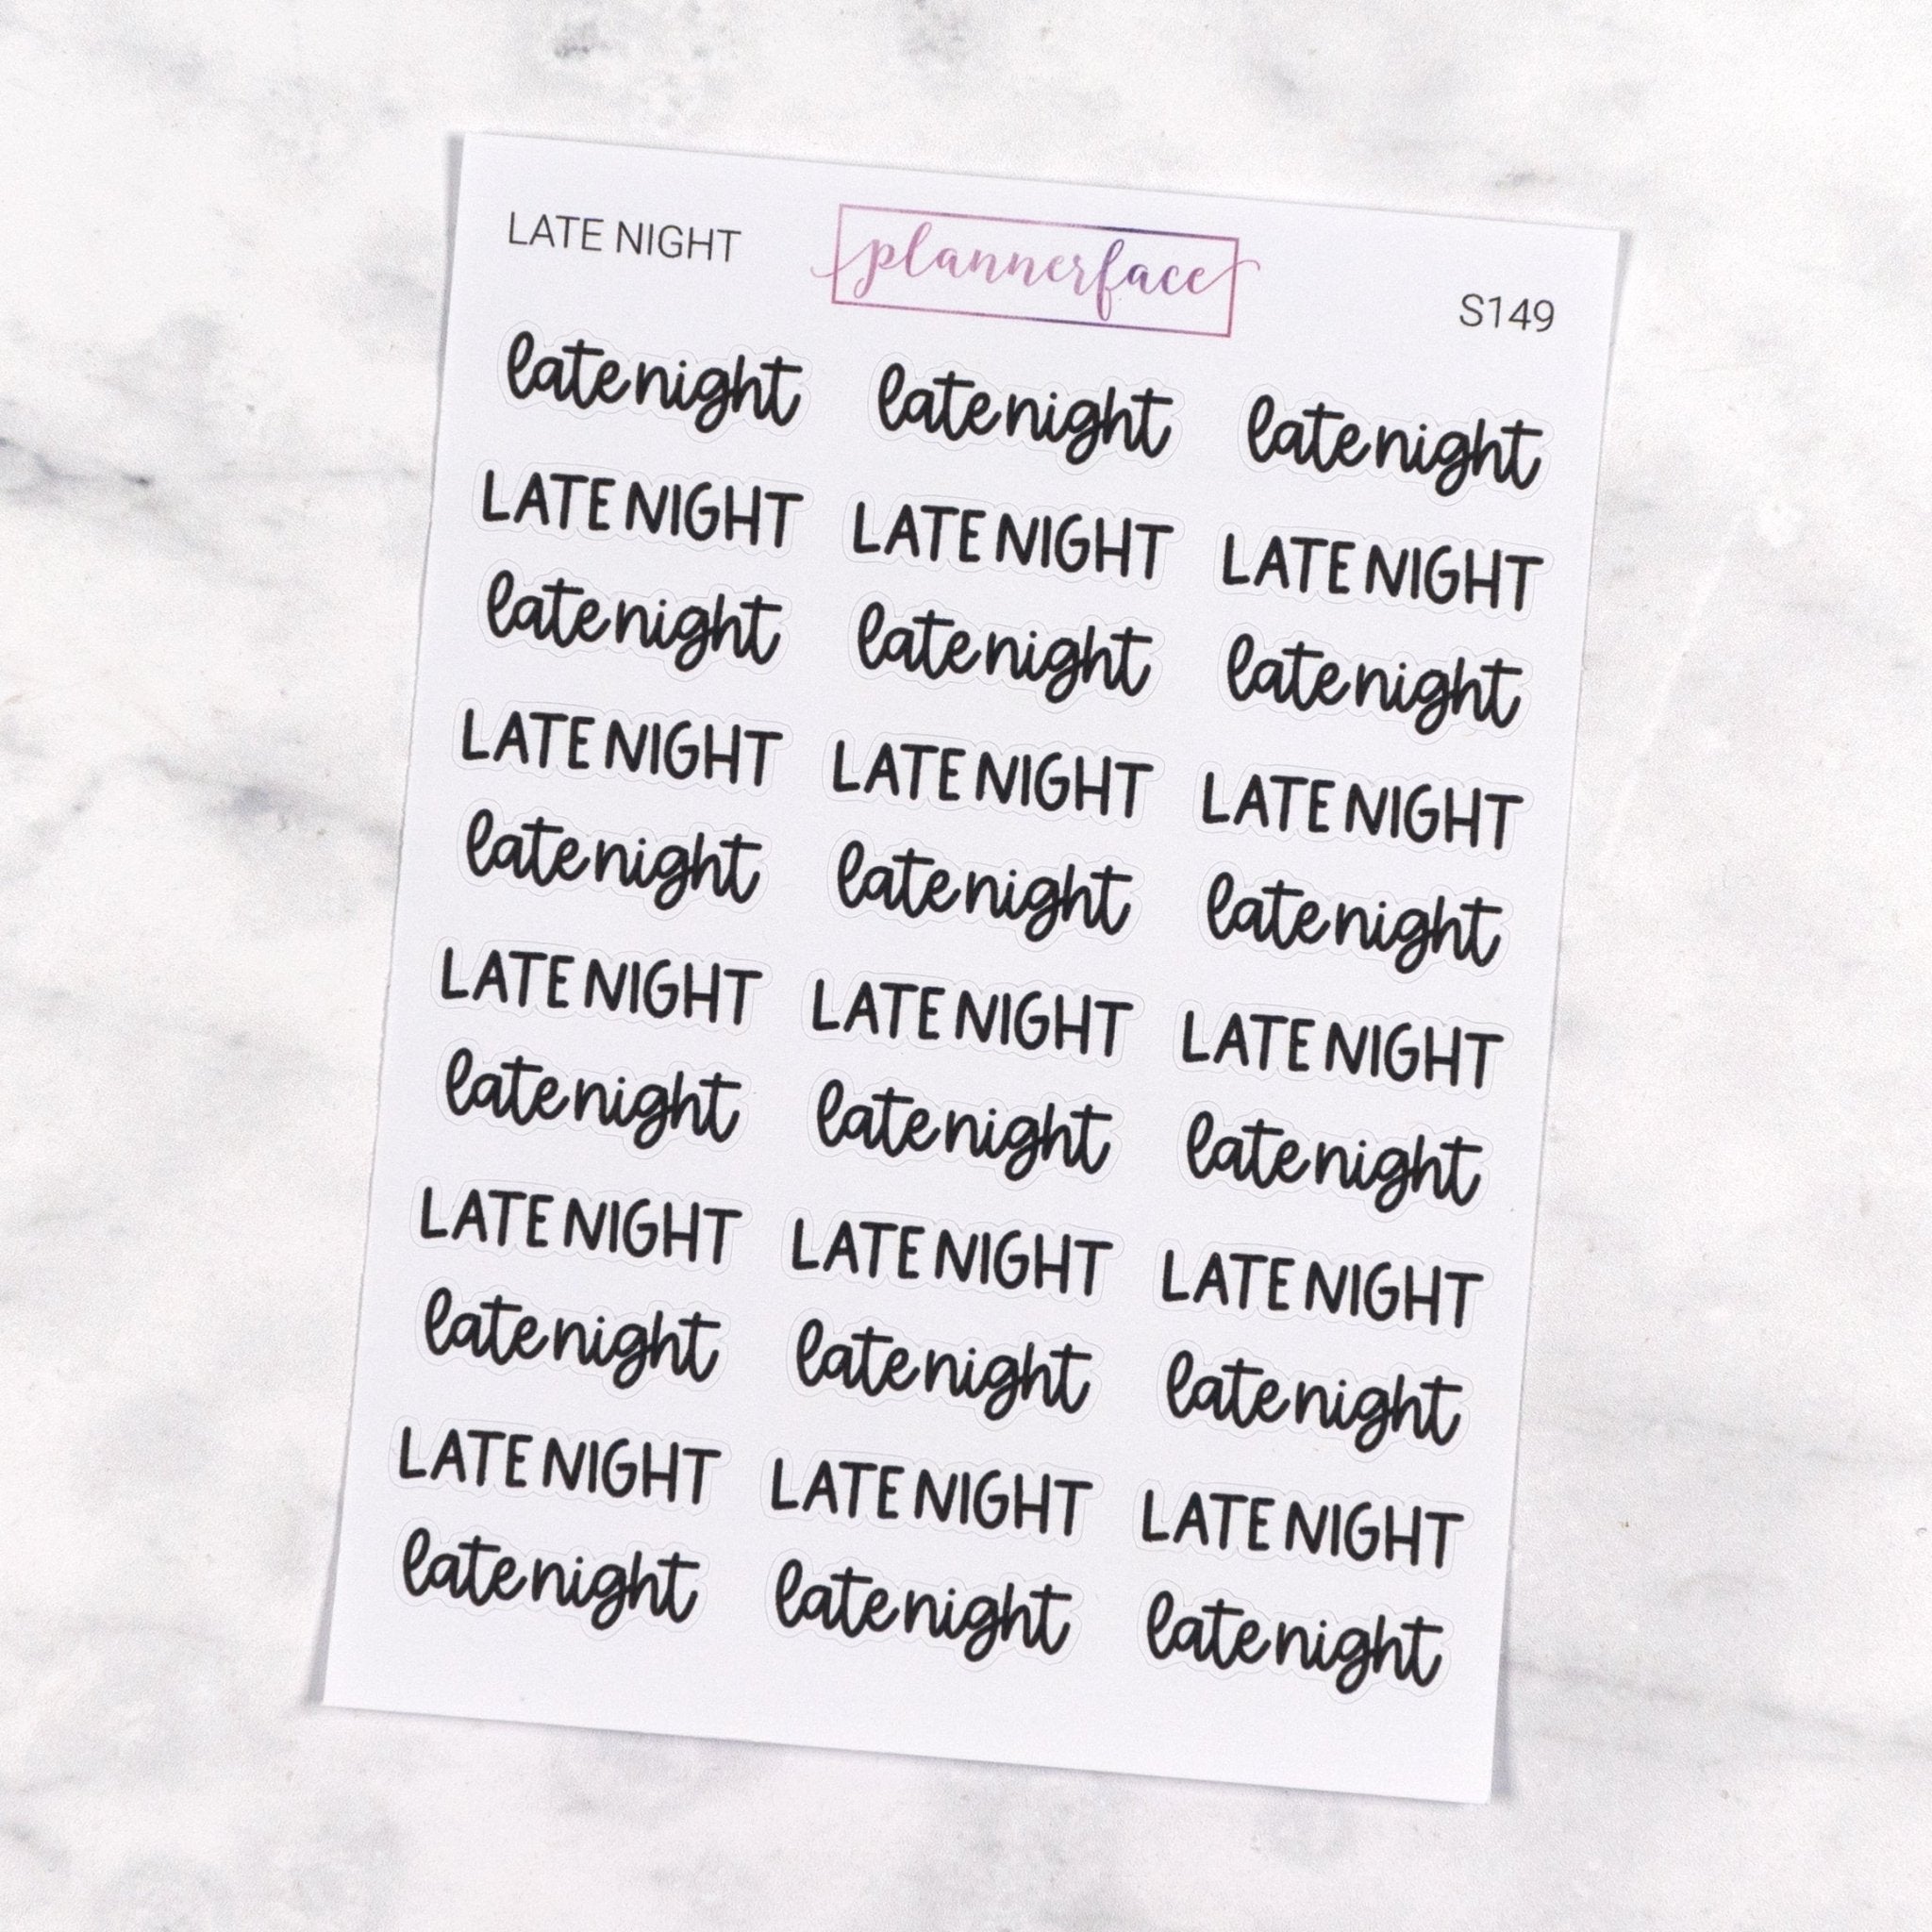 Late Night | Scripts by Plannerface